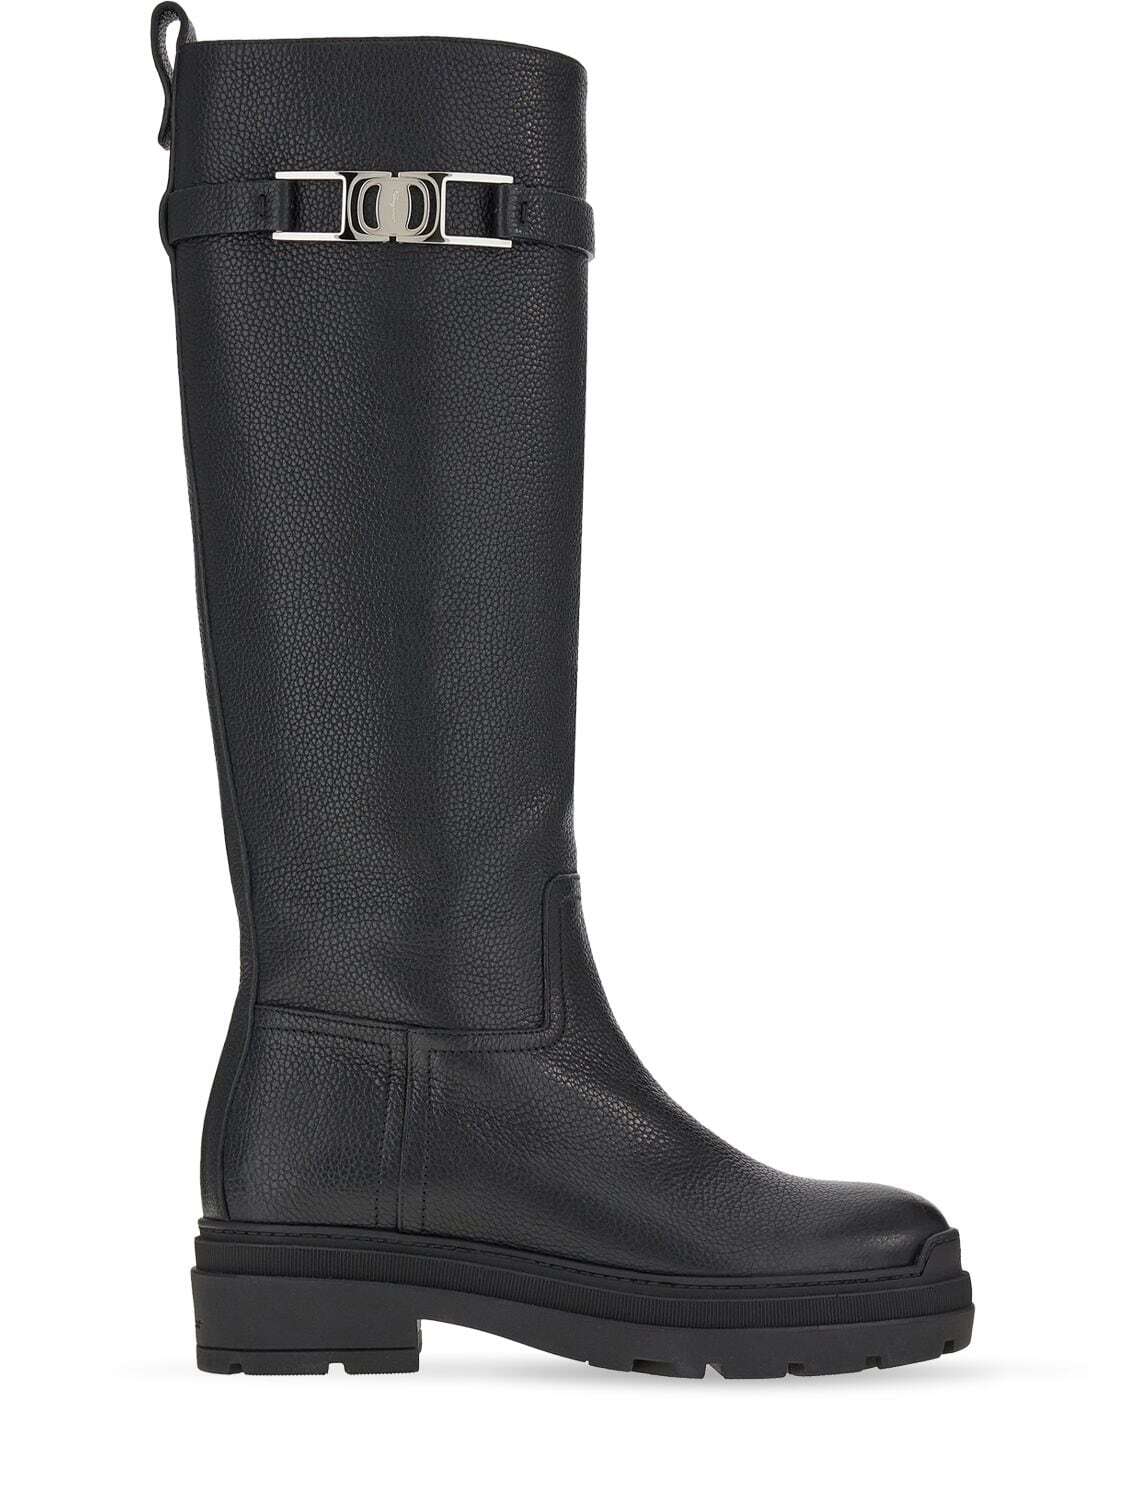 SALVATORE FERRAGAMO 20mm Ryder Leather Tall Boots in black